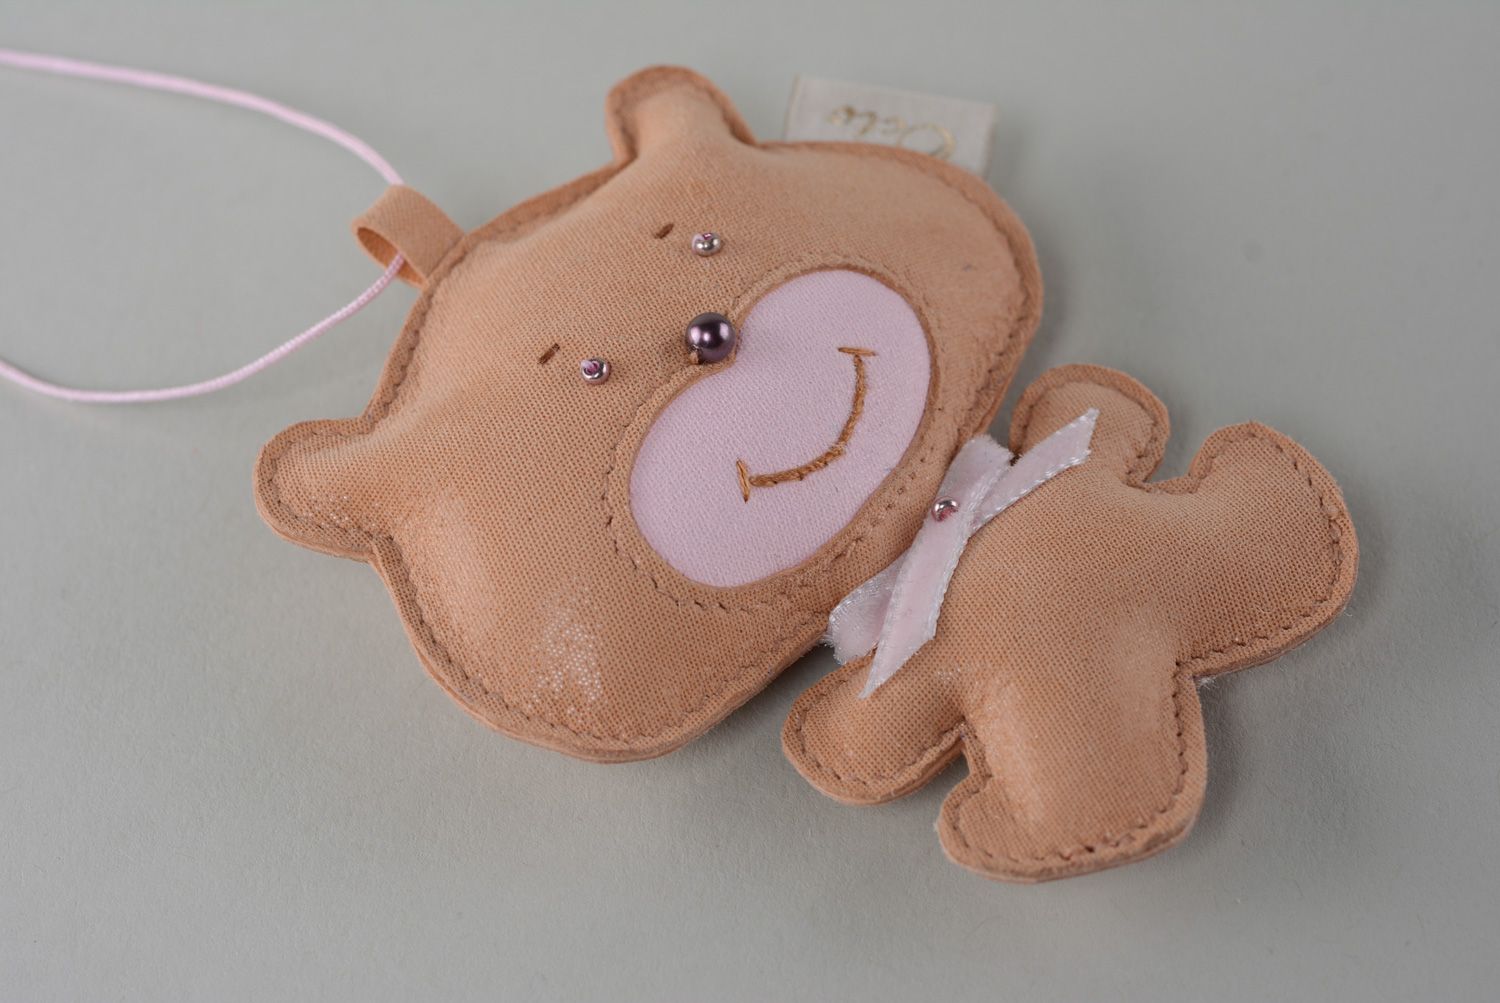 Leather charm in the shape of bear for keys or bag photo 4